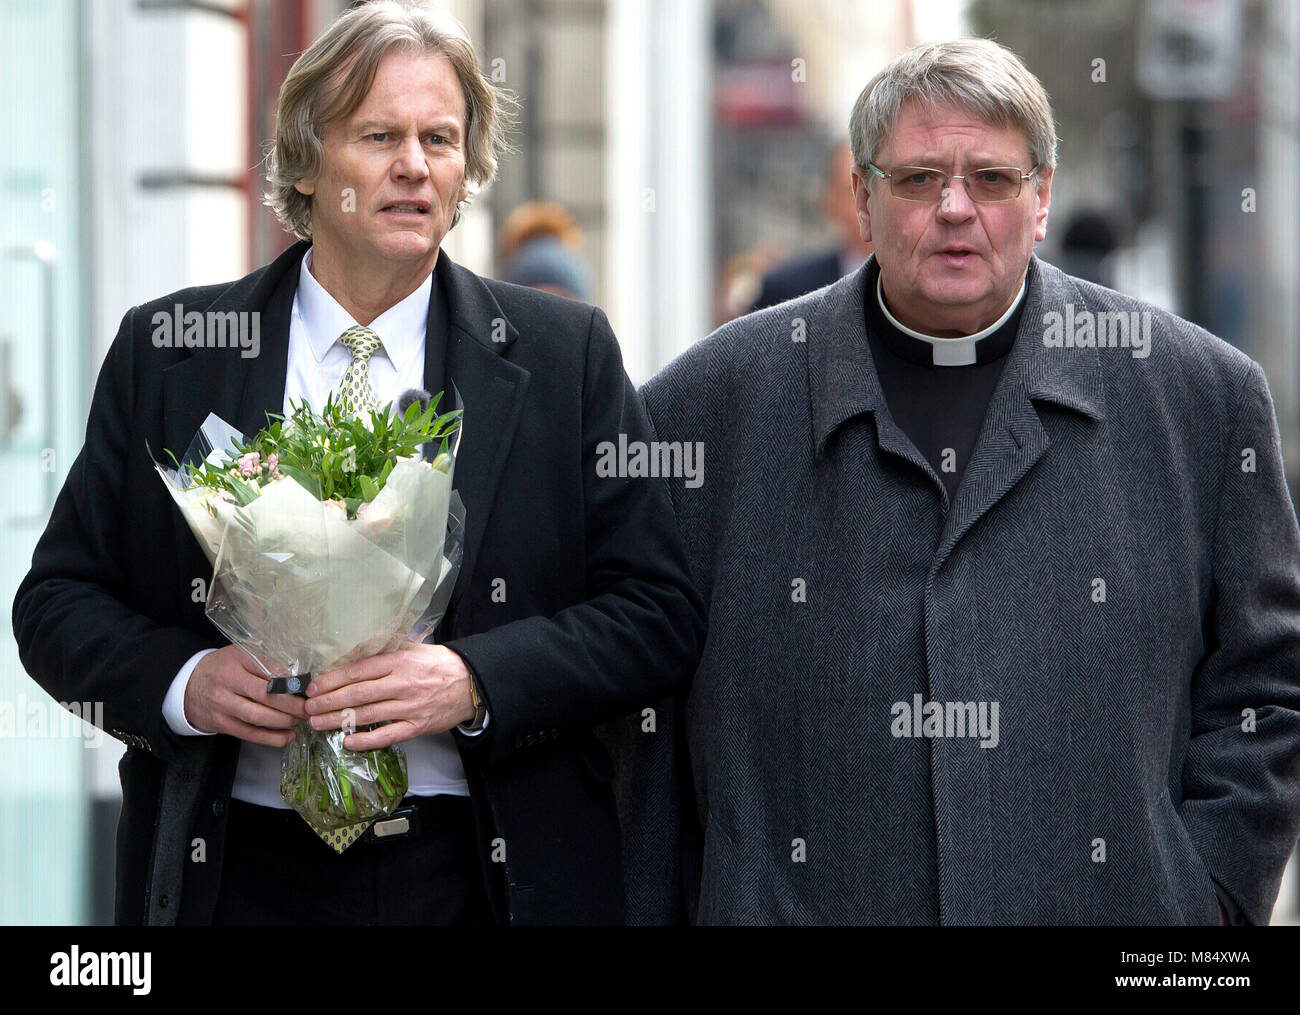 Odd Petter Magnussen (left) and Norwegian Rector and Senior Chaplain Torbjorn Holt, arrive at Great Portland Street in London, to mark the 10-year-anniversary since Martine Vik Magnussen died. Stock Photo